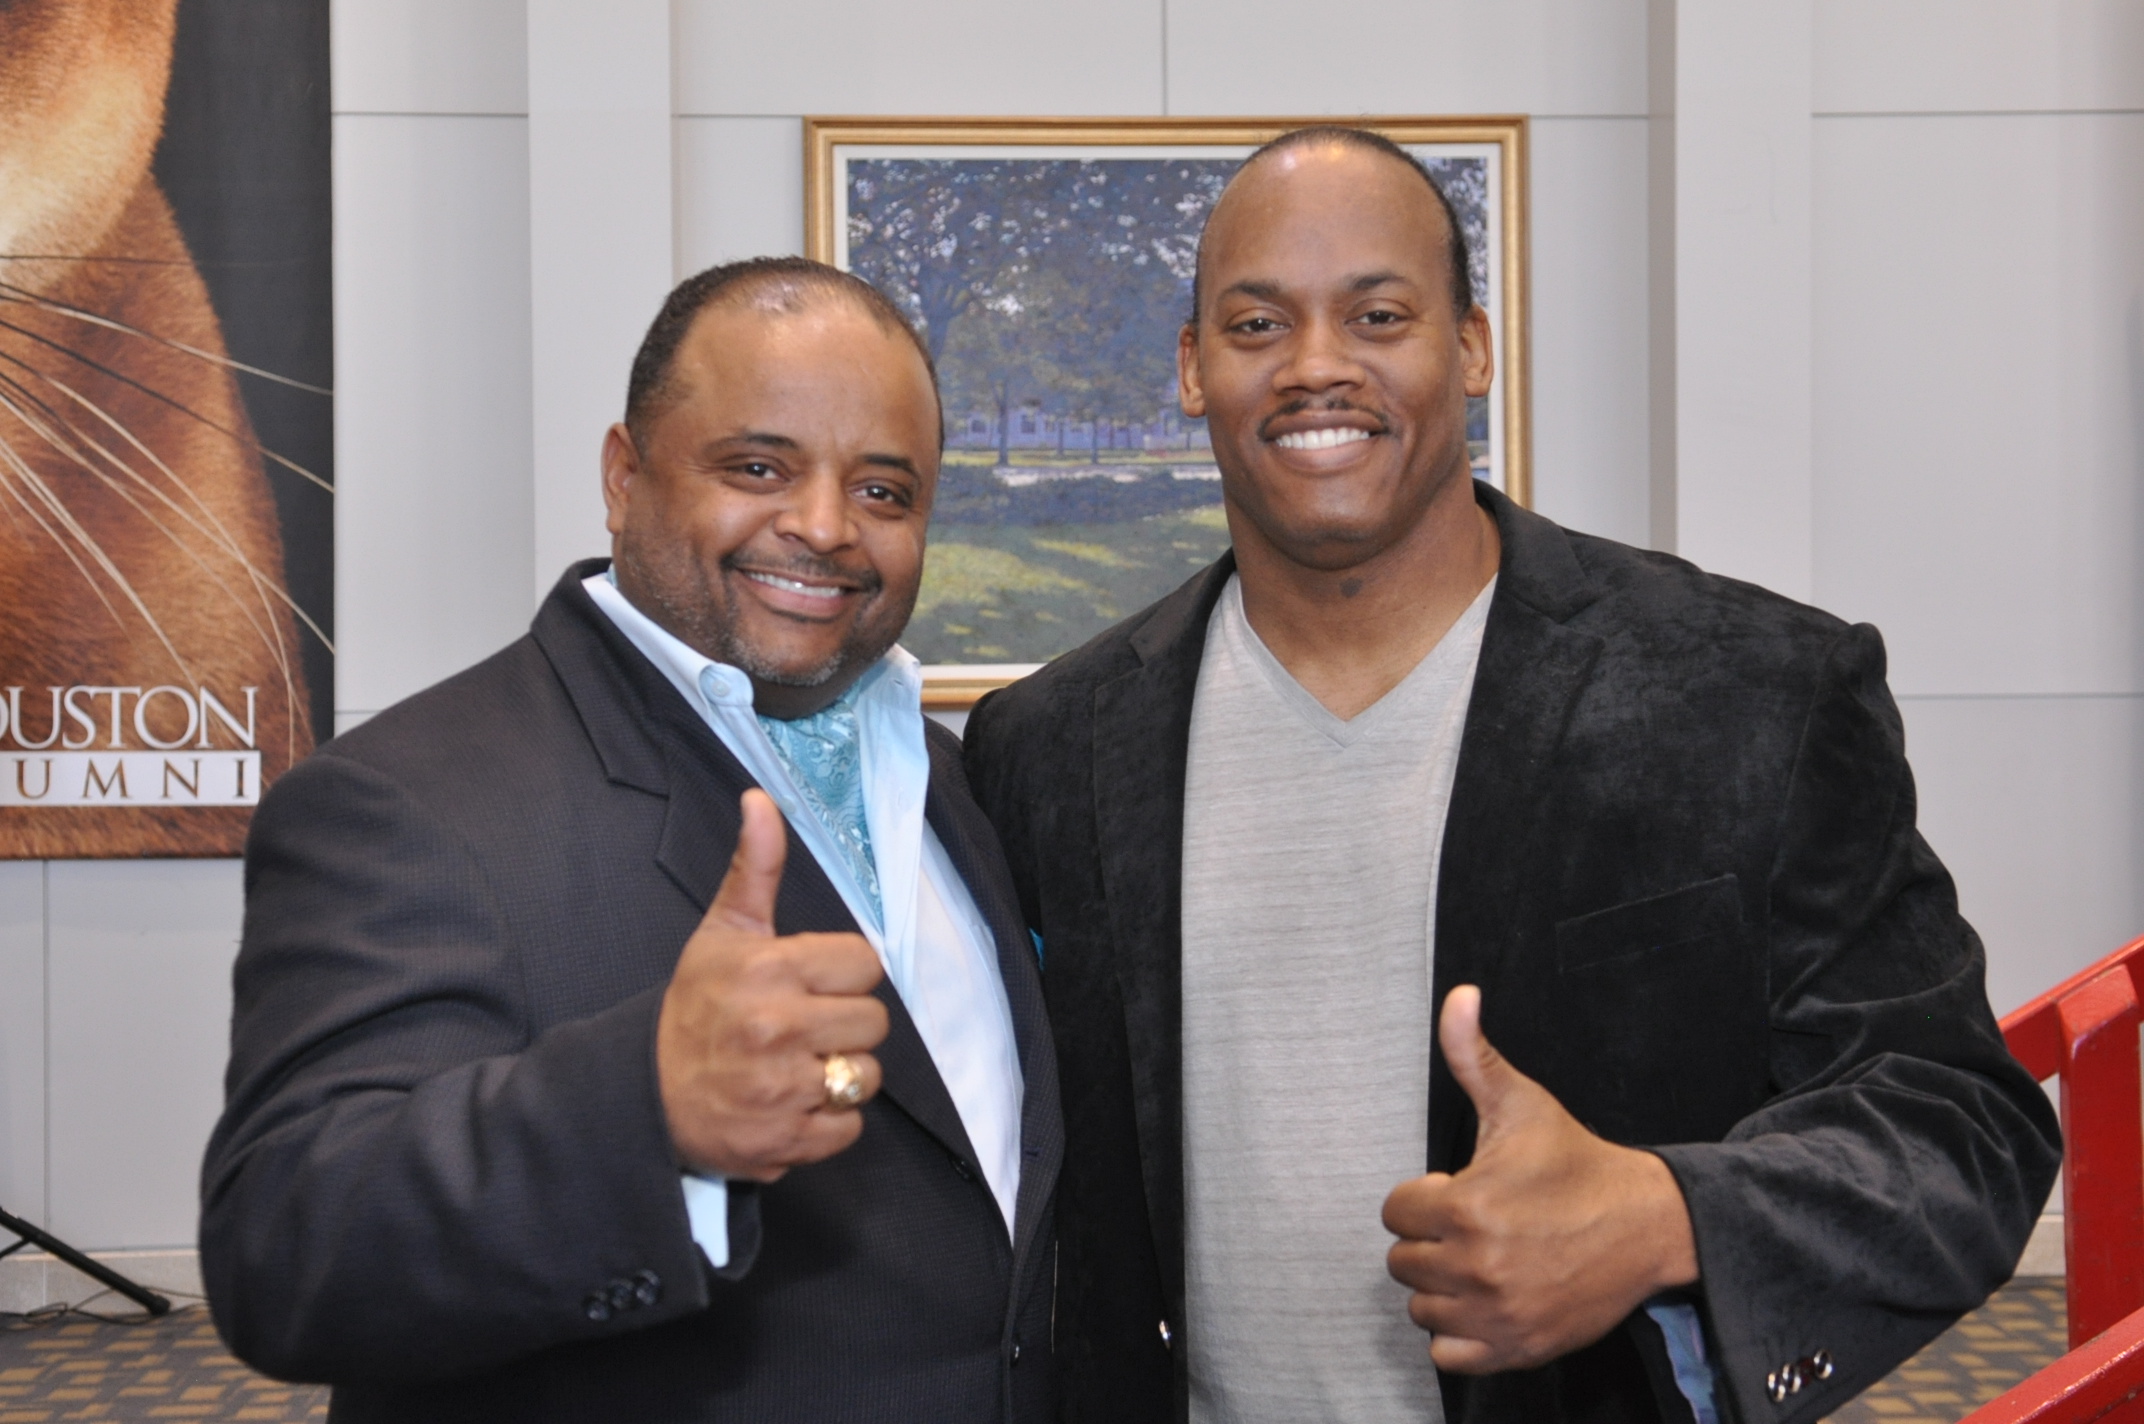 Producer Greg Carter and CNN analyst Roland Martin at NBA Legends game, All Star Weekend 2013, Houston,Texas.